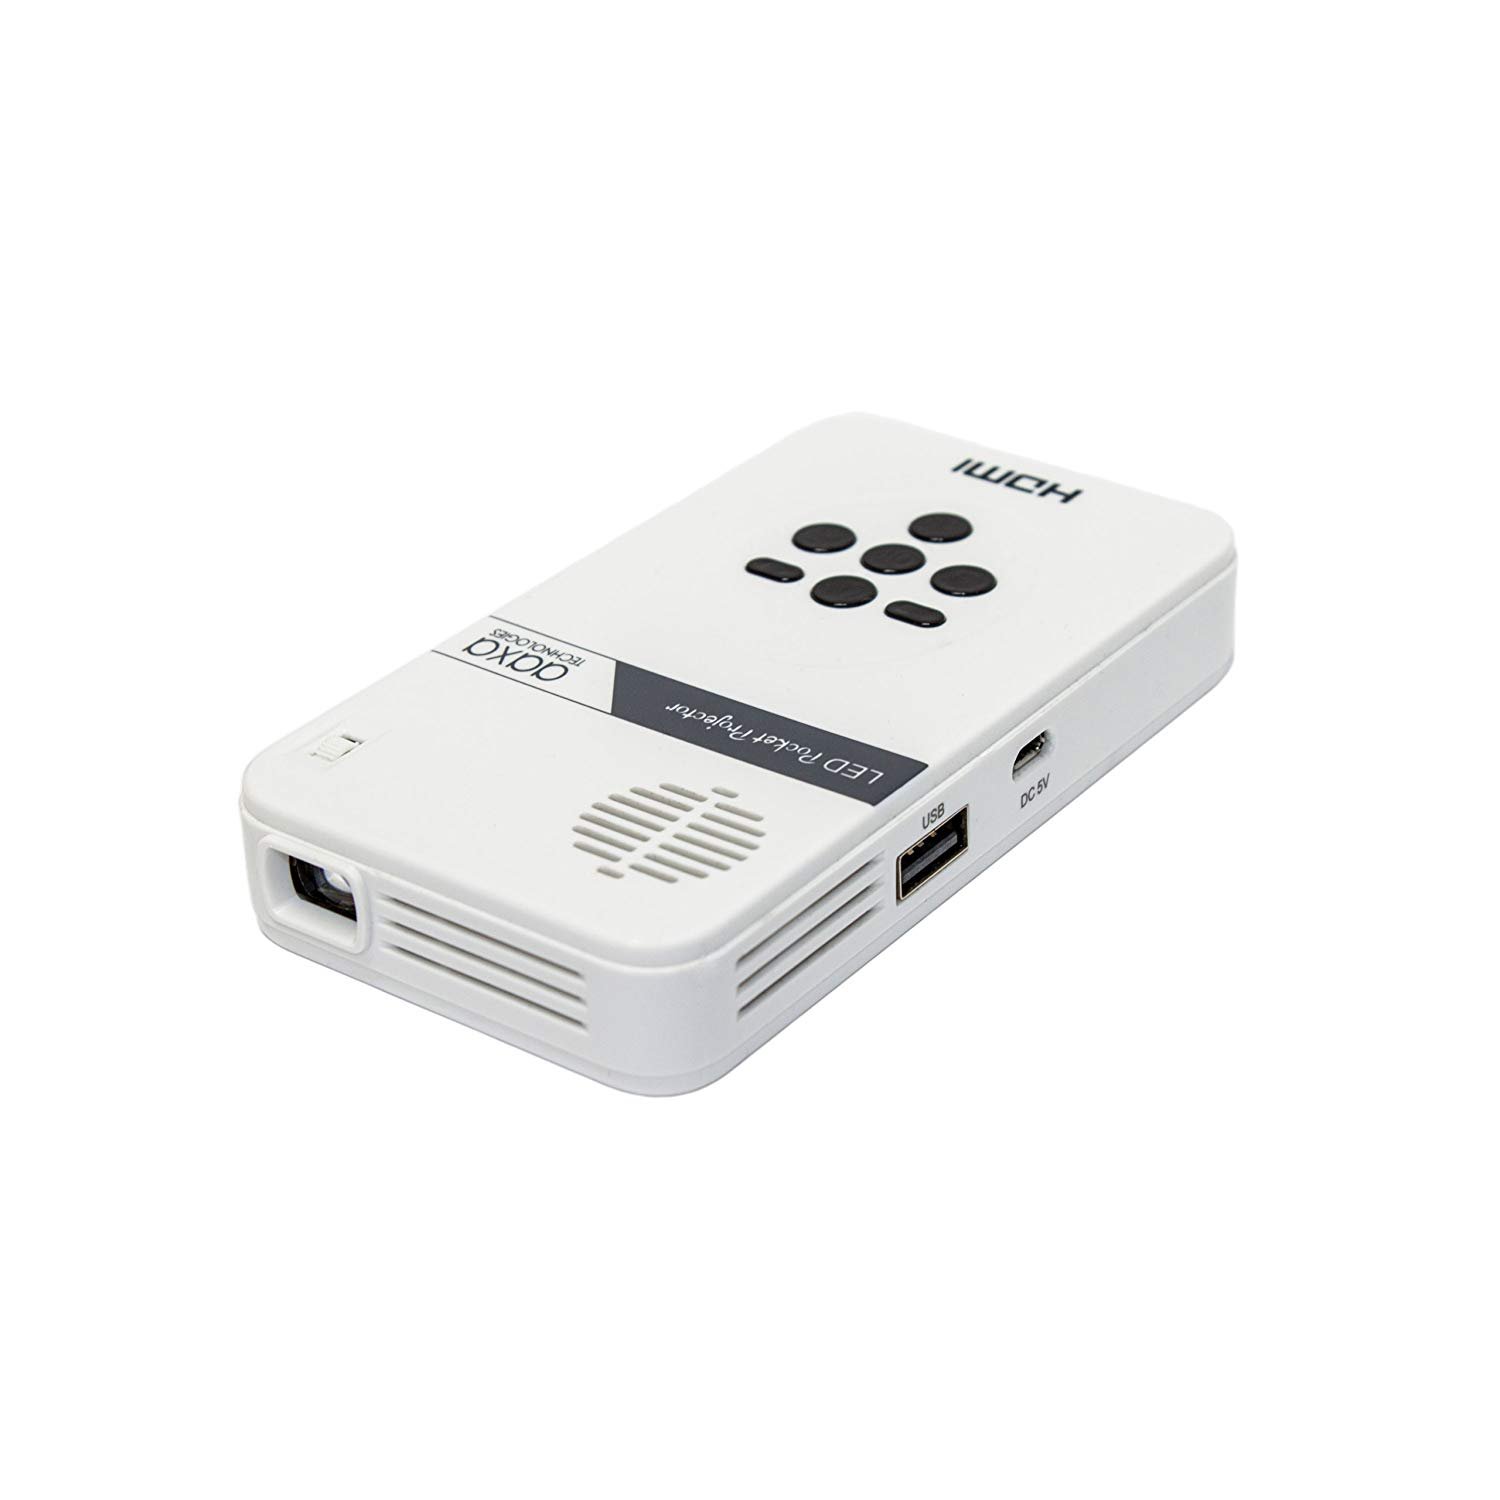 AAXA LED Pico Projector - DLP projector - black, white - KP-101-01